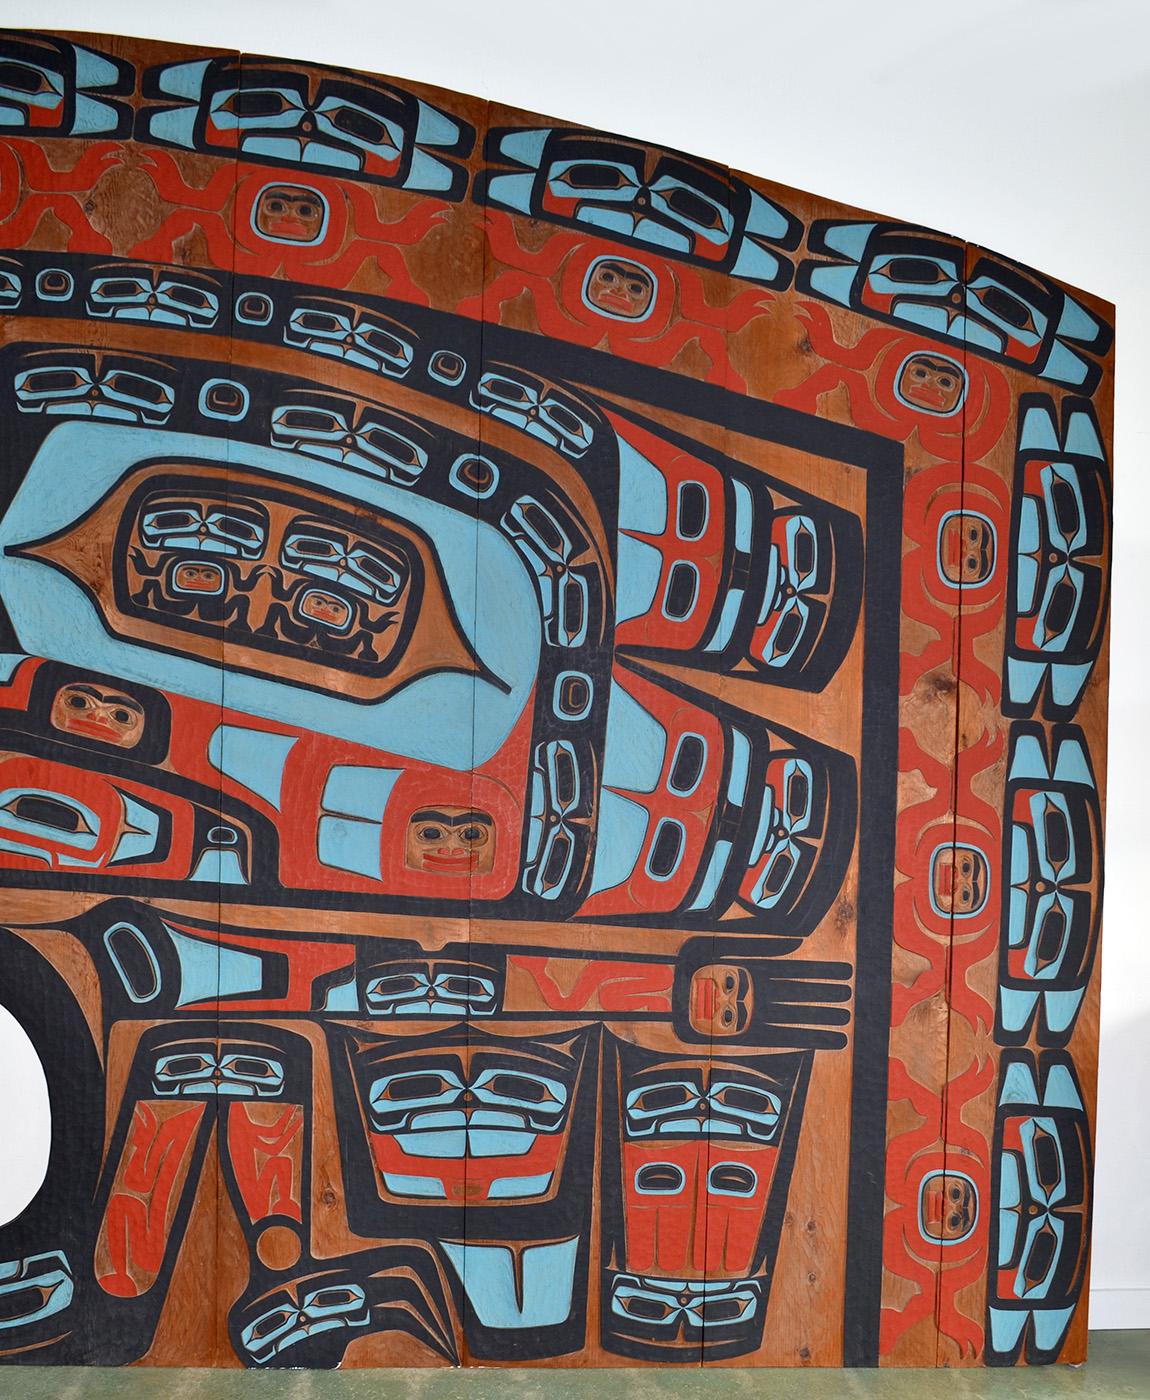 Native American Pacific Northwest Tlingit Whale House Rain Wall from Donald Judd Estate, c. 1968